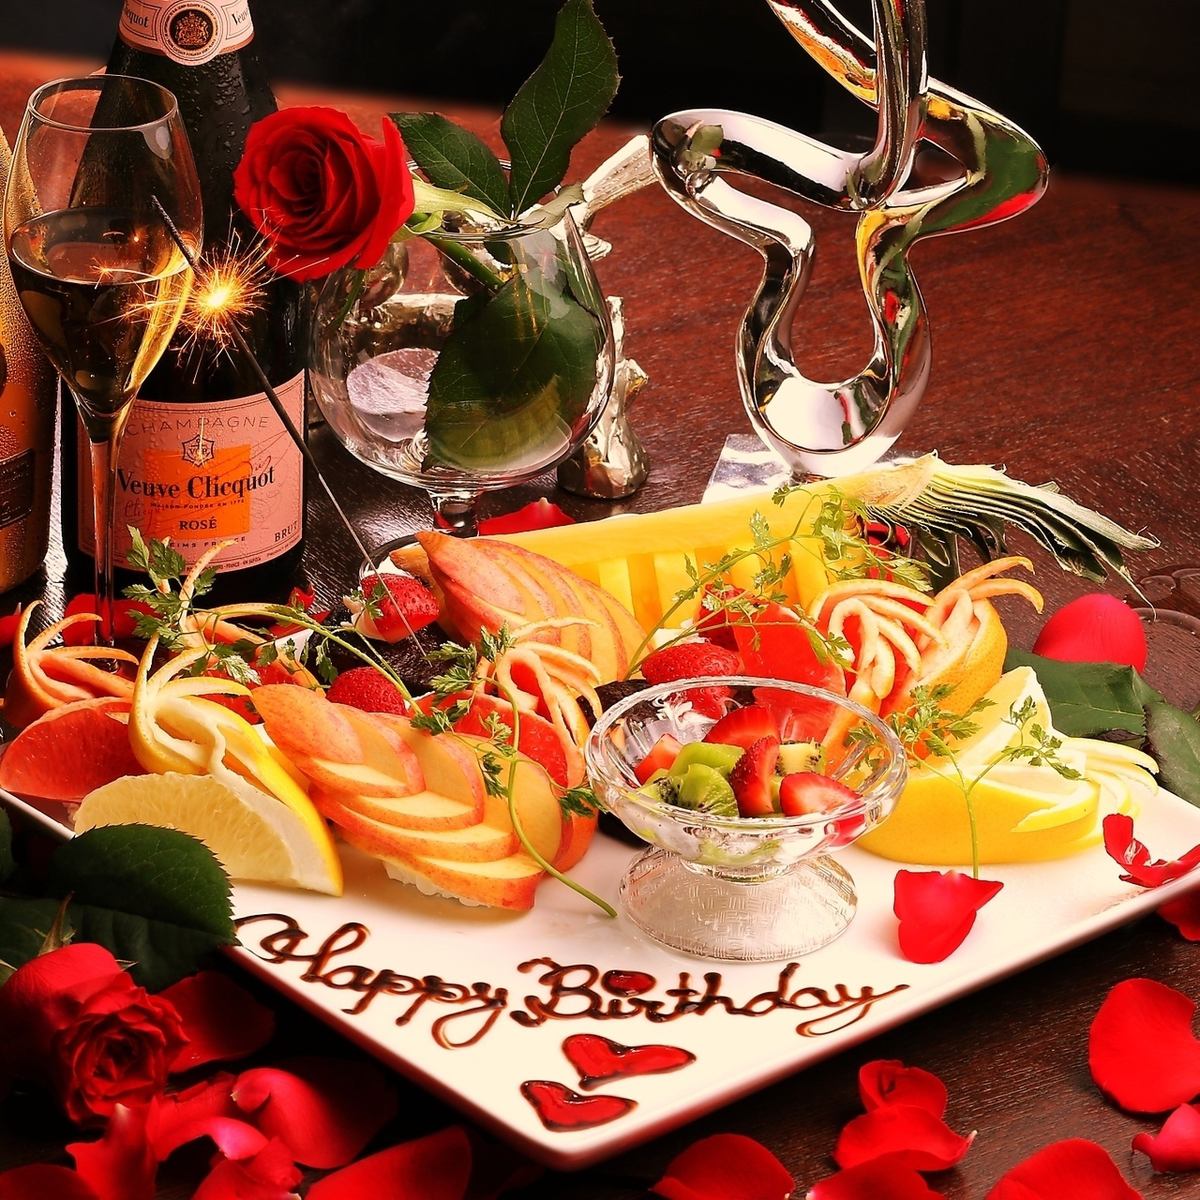 For birthdays and anniversaries ◎Free coupon for special dessert plate for 4 people